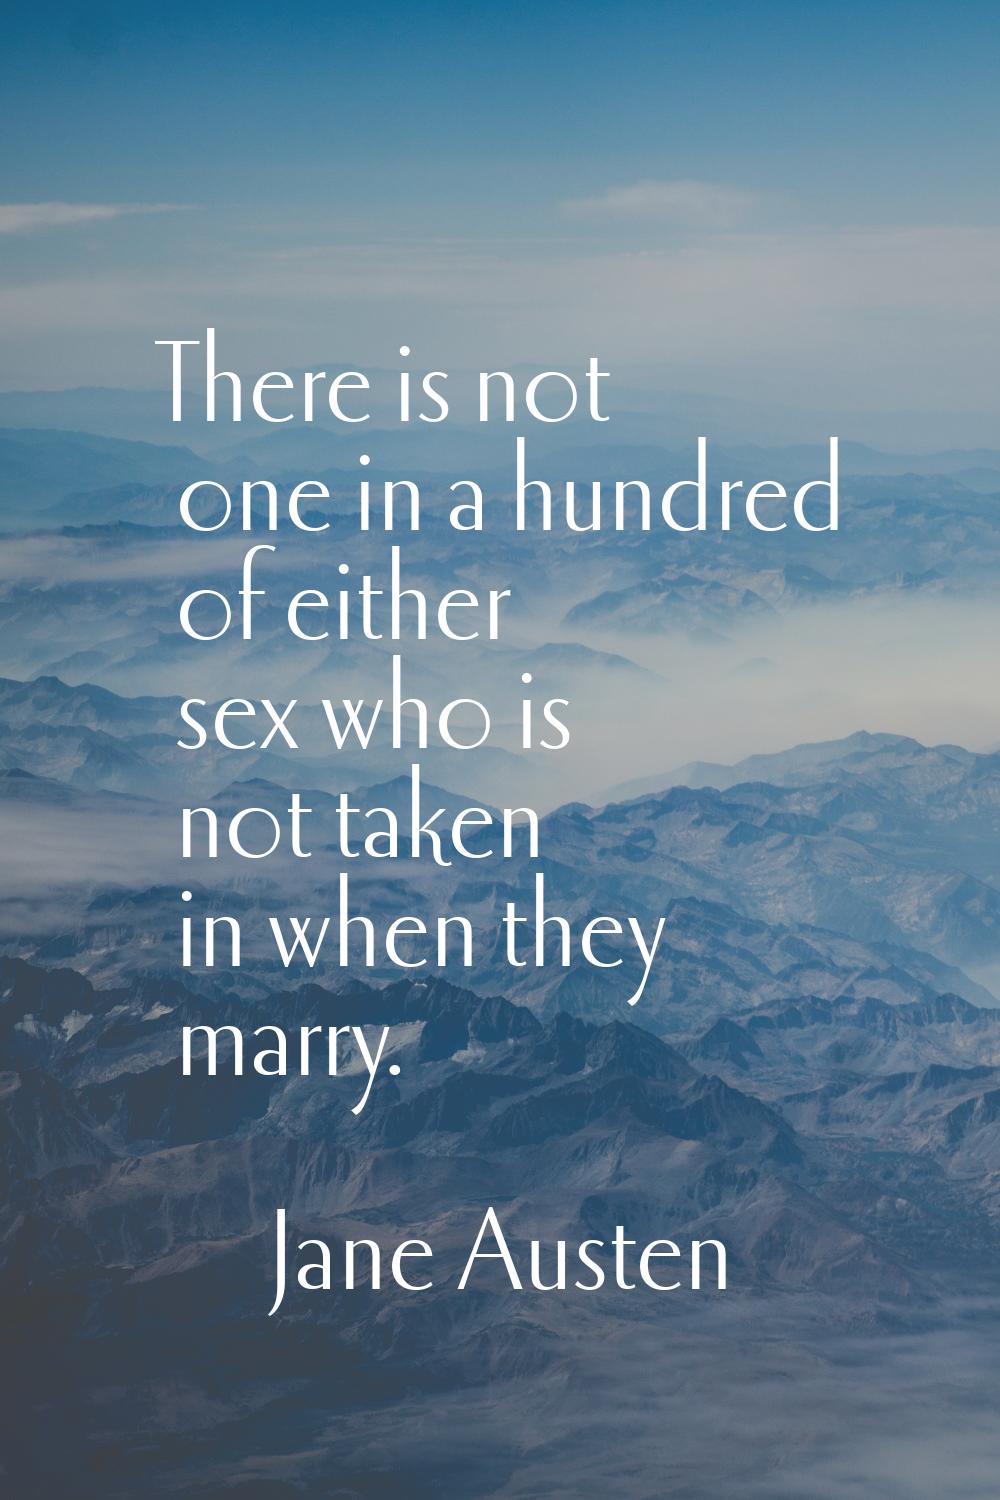 There is not one in a hundred of either sex who is not taken in when they marry.